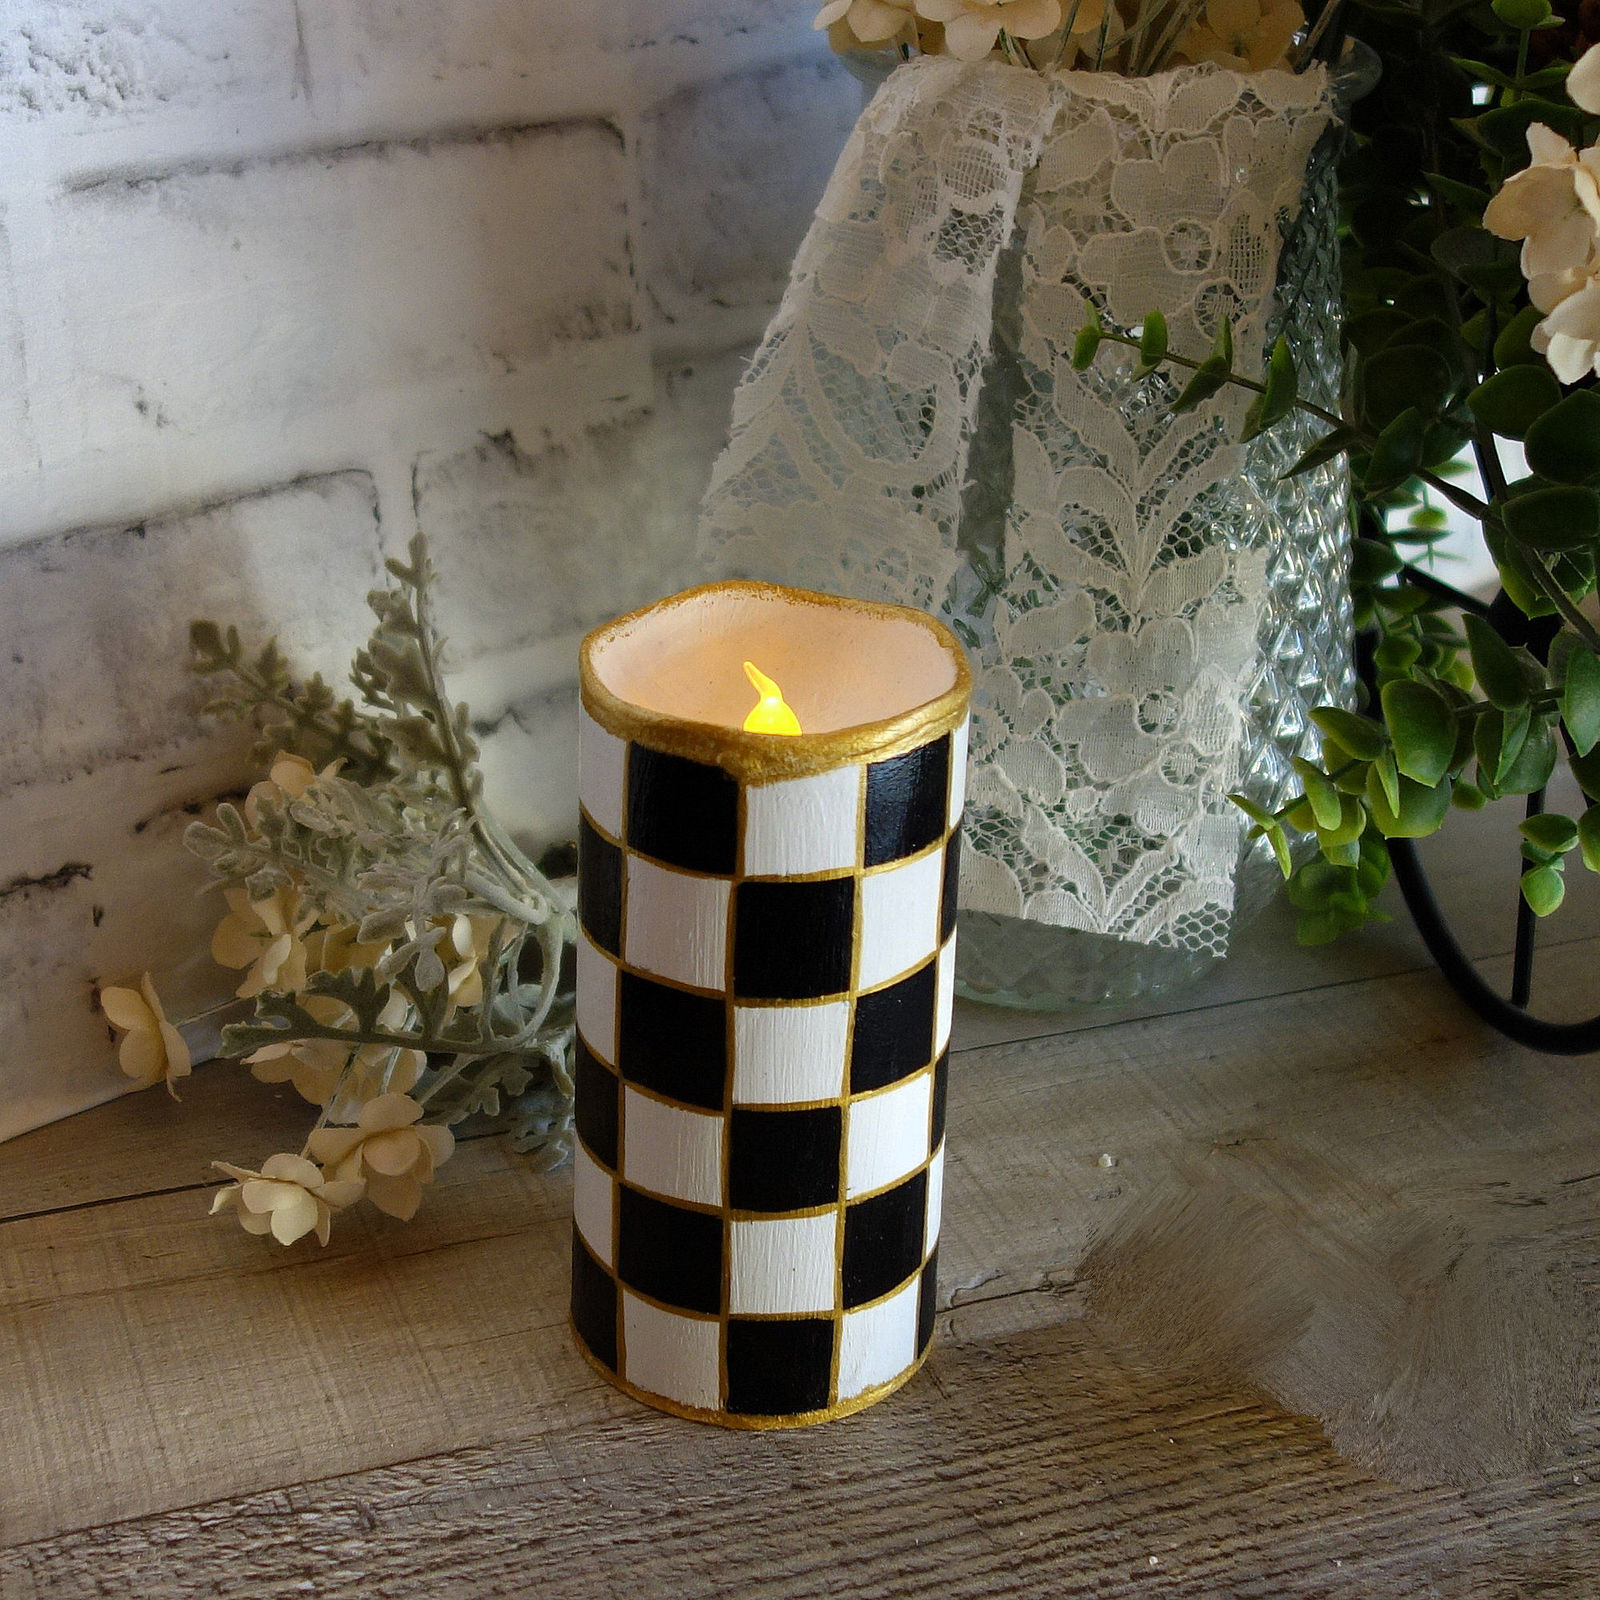 Black and White Checked Candle 5" Courtly Candle LED Battery Checkered Candle - $27.50